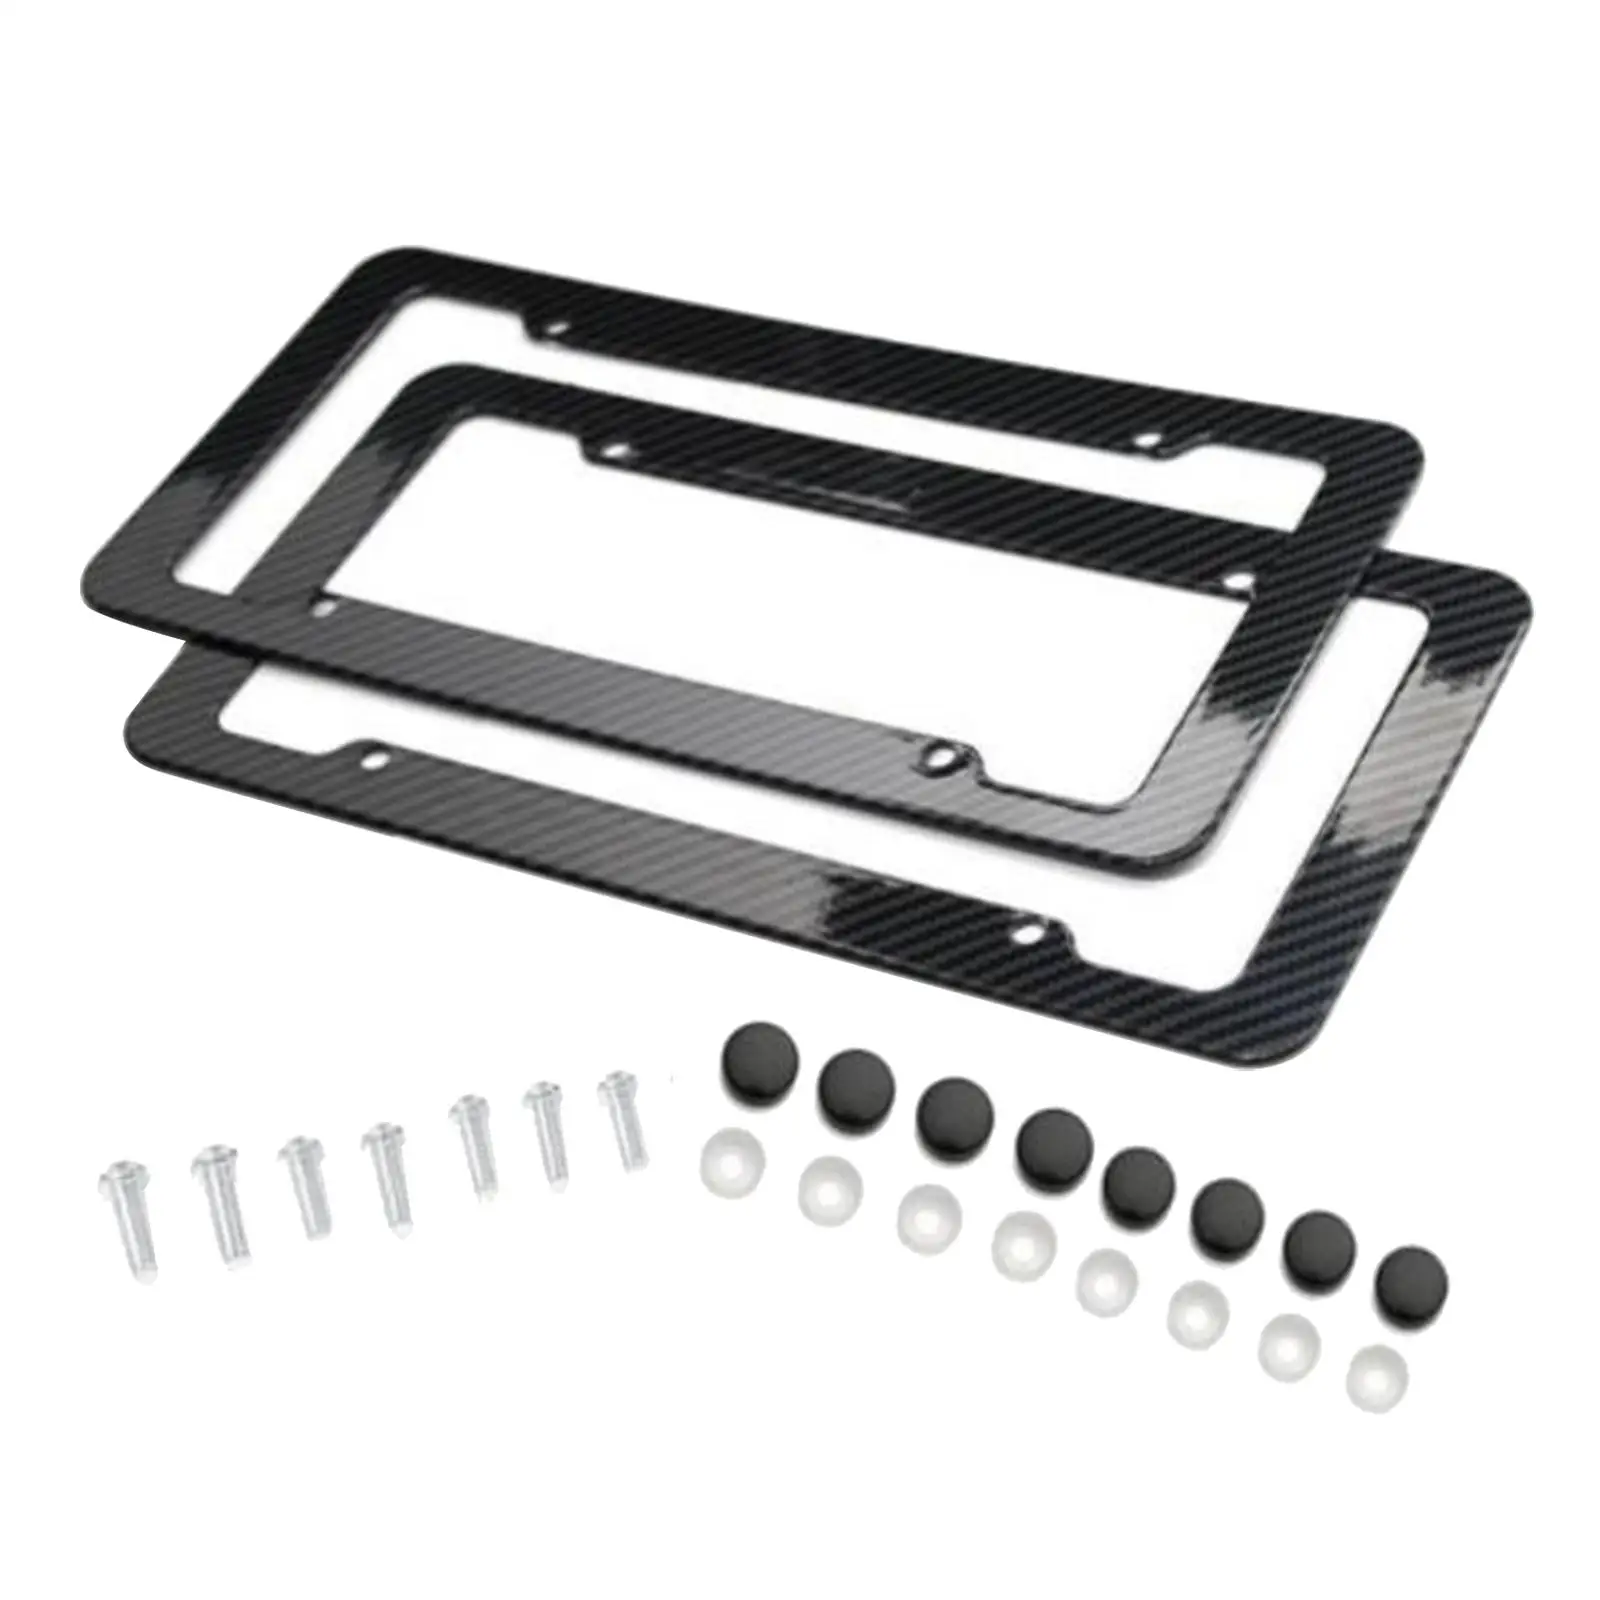 2 Carbon Fiber Style License Plate Frames Front Rear with Screws Holder for Car Truck US Accessories